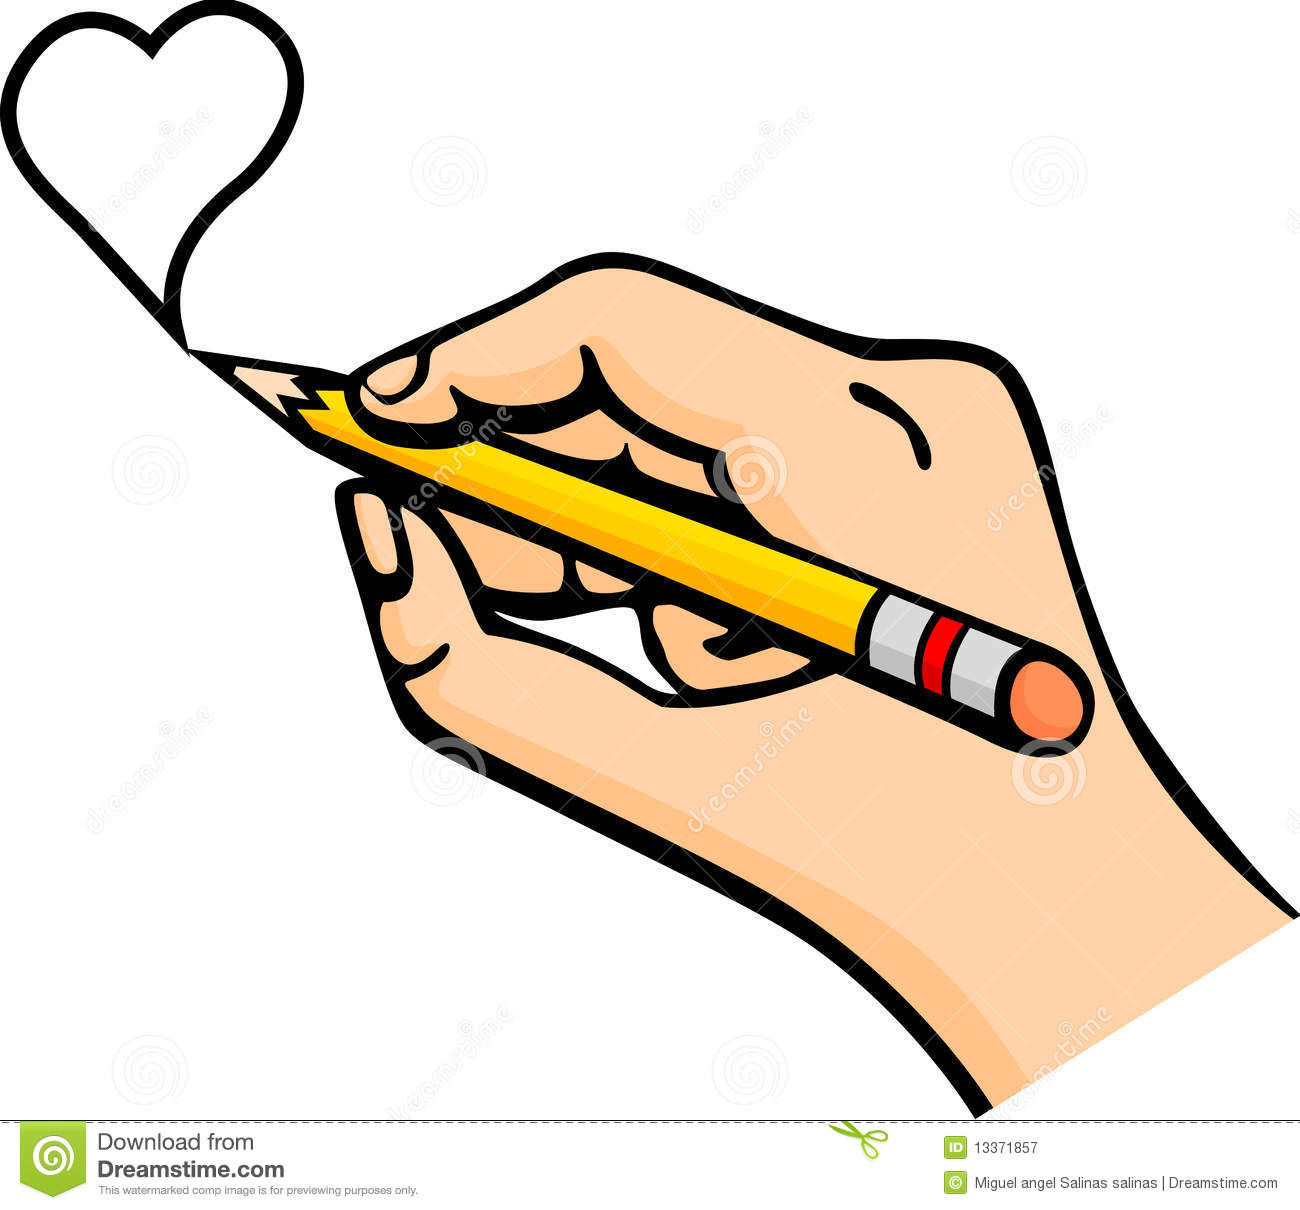 Hand Drawing Heart With Pencil Vector Illustration Royalty Free Stock